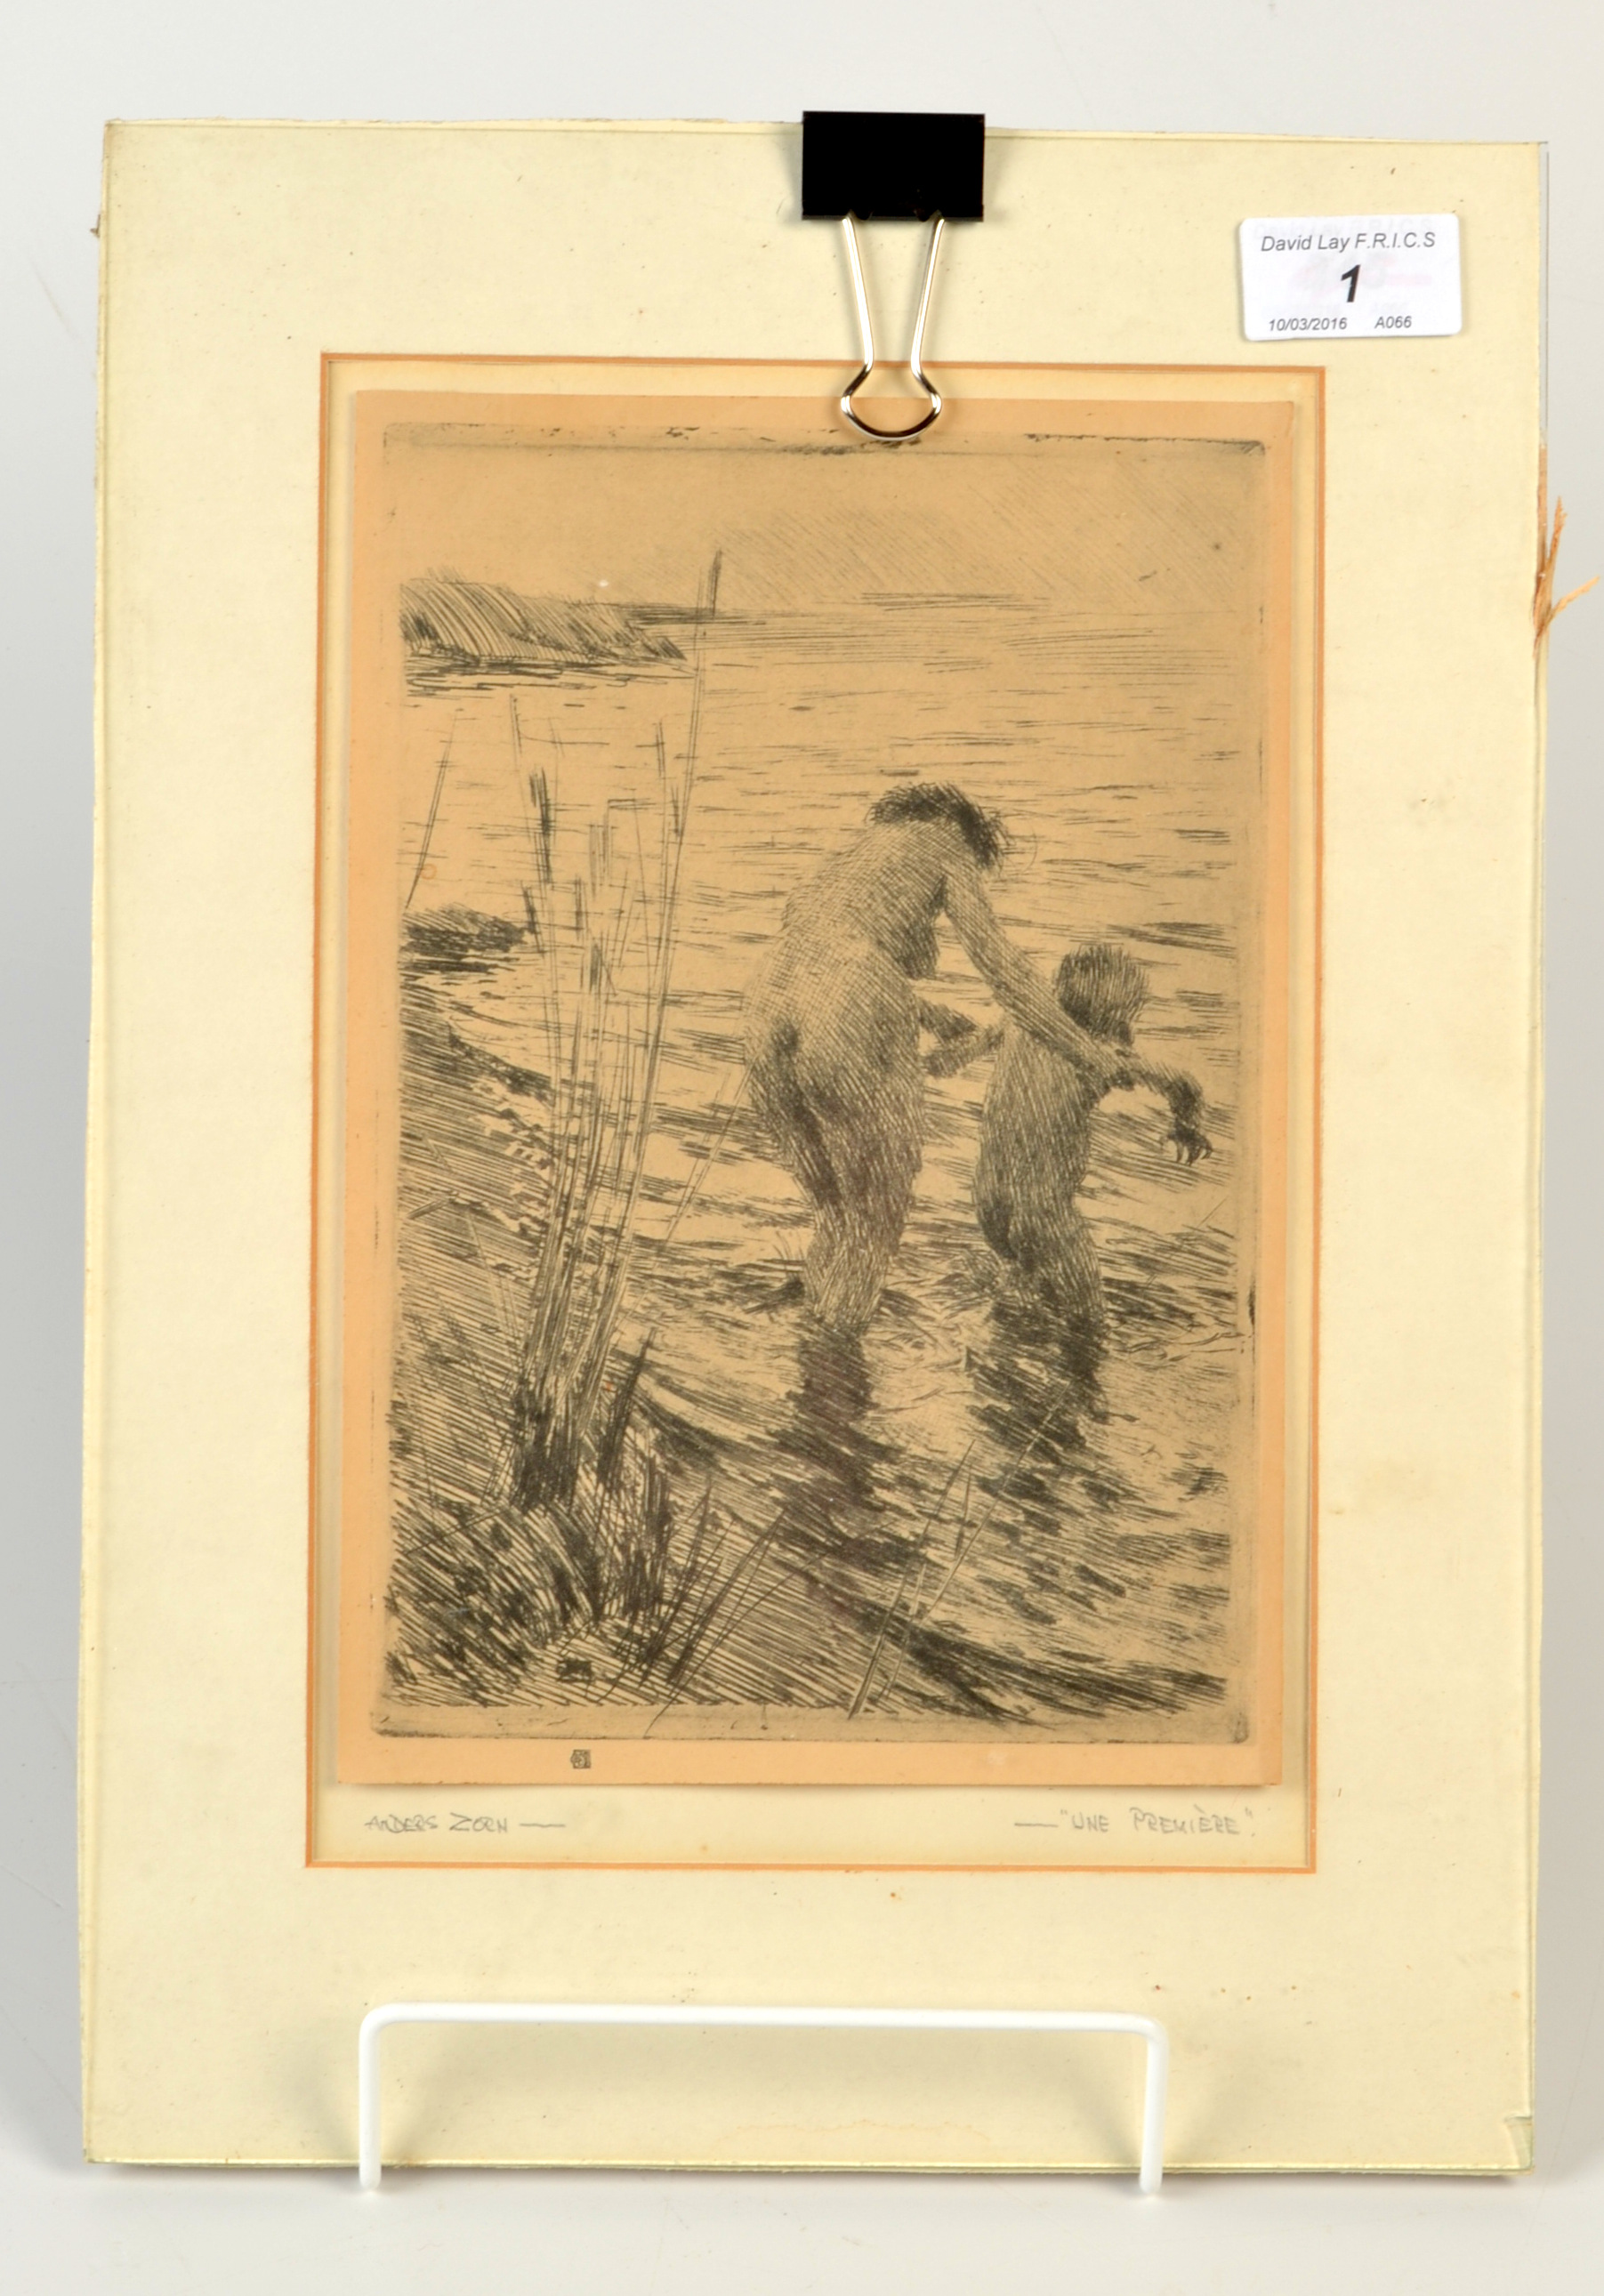 An Anders Zorn print "Une Premiere" and other prints. - Image 2 of 2